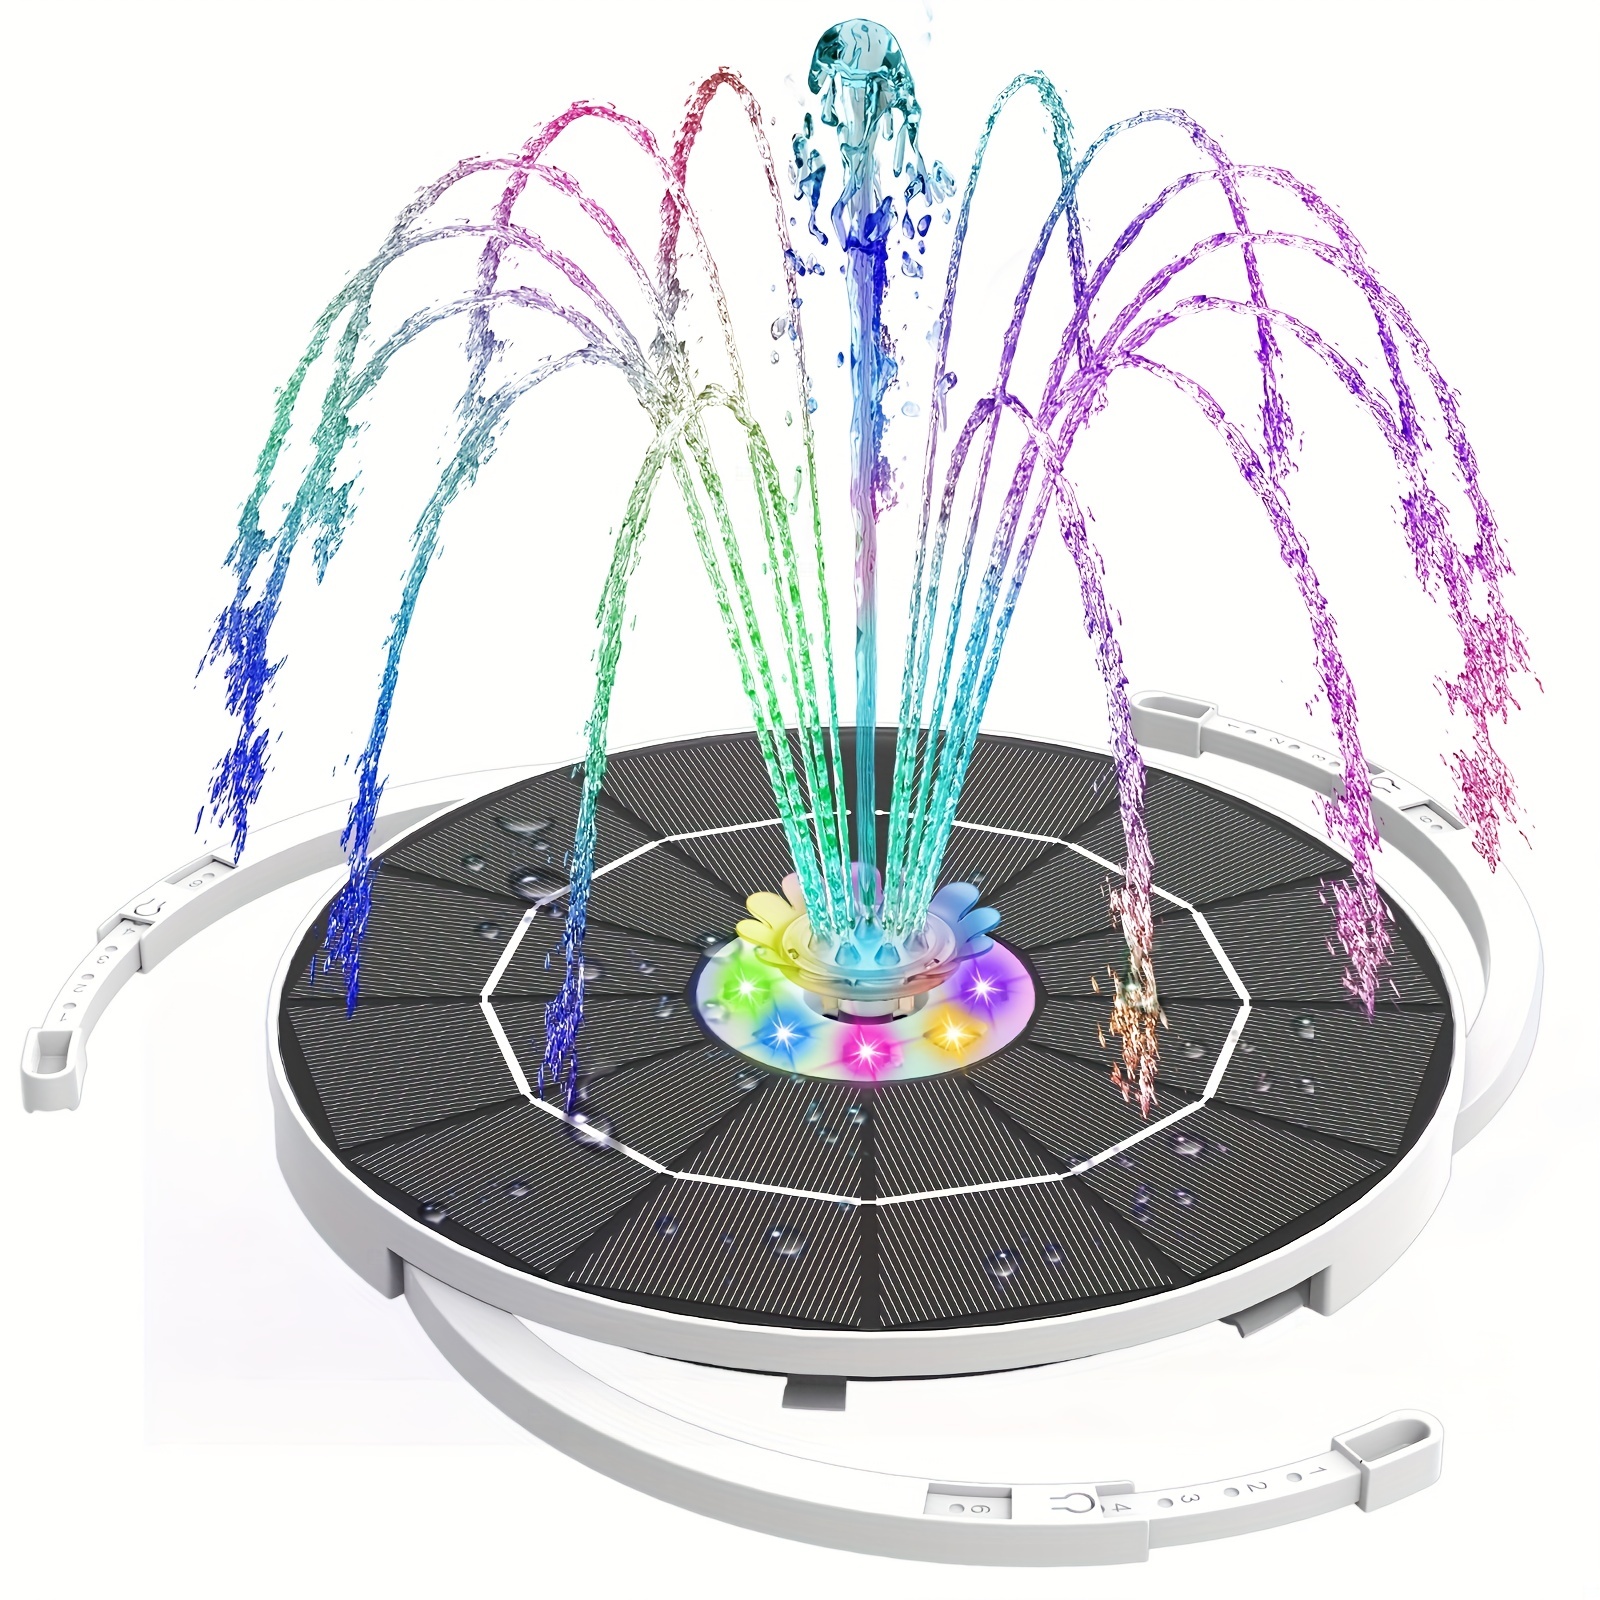 Shxx Solar Fountain With Led Lights, 3w Bird Bath Fountain Pump With 7  Nozzles Upgraded Solar Powered Battery Led Light Floating Fountain Water  Pump F